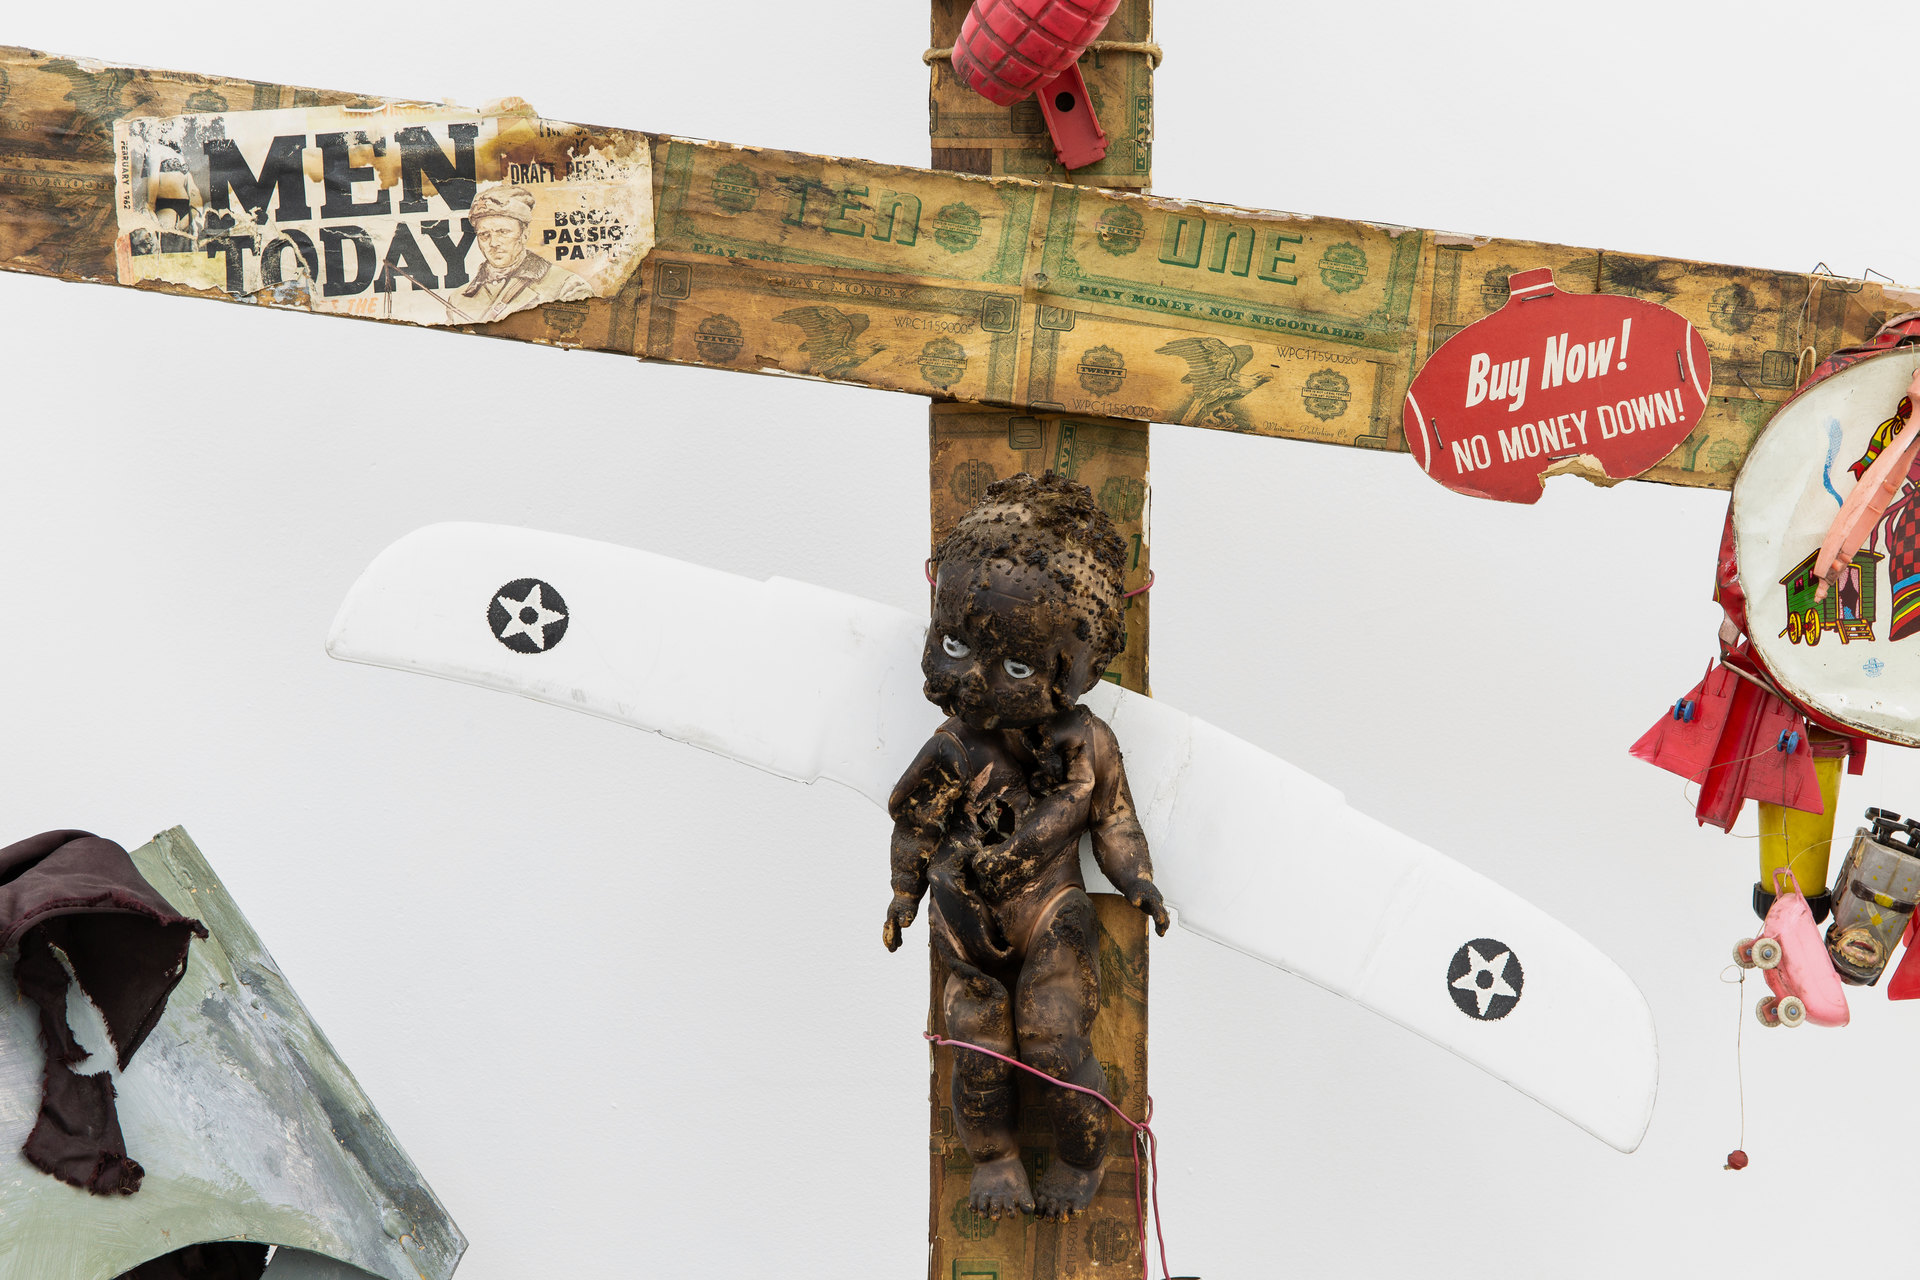 Sam Goodman, 'The Bomb' [detail], 1960–61, Found Object Assemblage, 193 x 121 x 58cm, Shit and Doom - NO!art, 2019, Cell Project Space